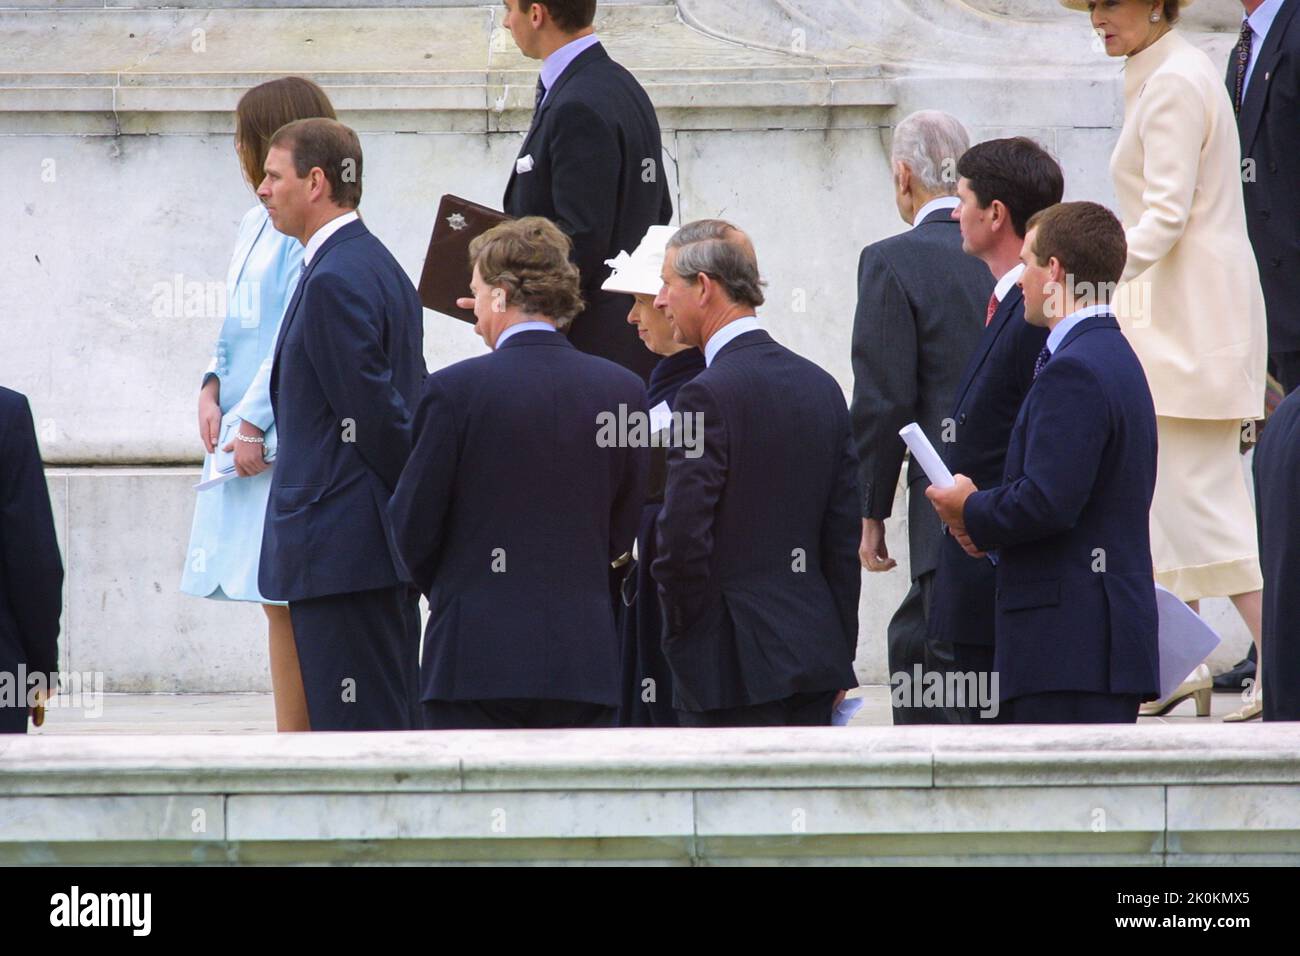 4th June 2002 - Members of British Royal Family attending Golden Jubilee of Queen Elizabeth II at Buckingham Palace in London Stock Photo